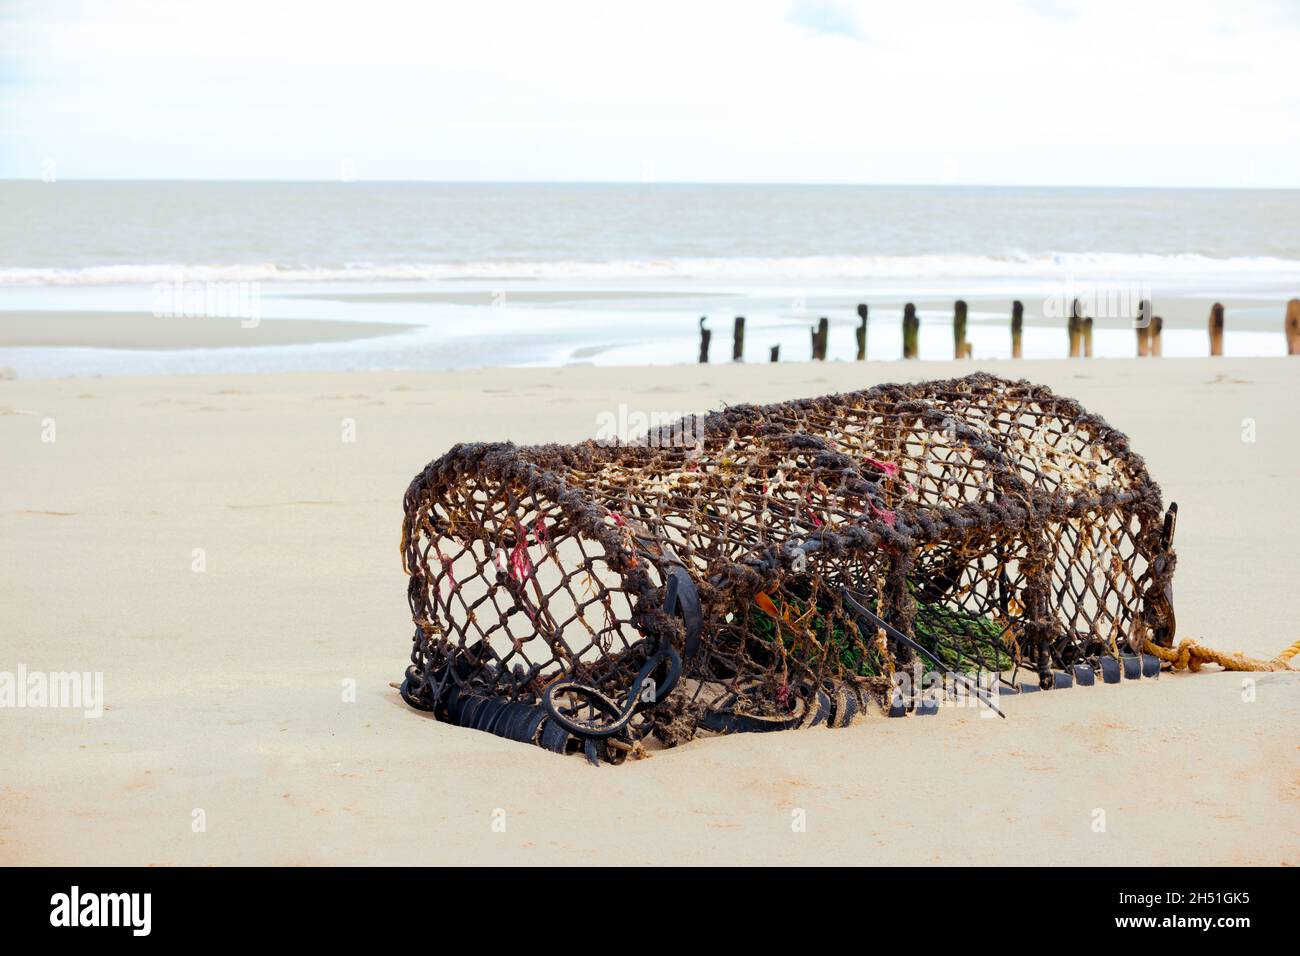 A discarded lobster trap or pot washed ashore onto a beach Stock Photo